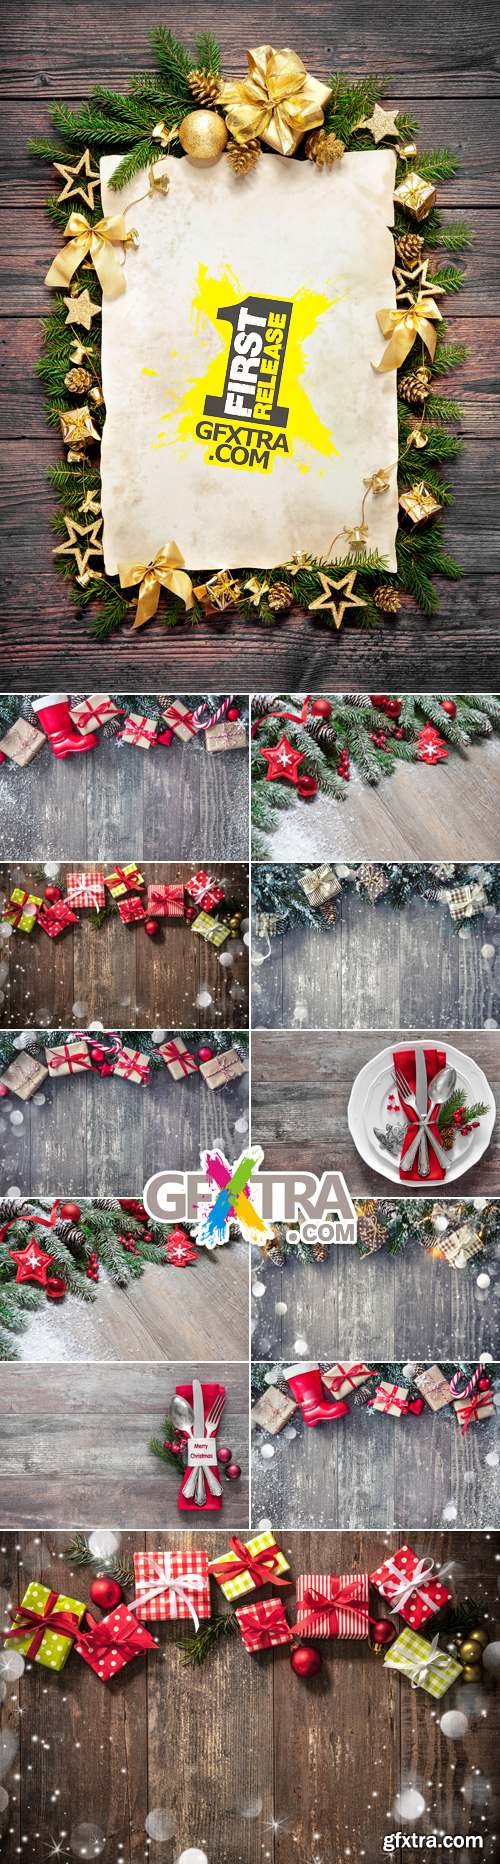 Stock Photo - Christmas Decorations on Wooden Background 12